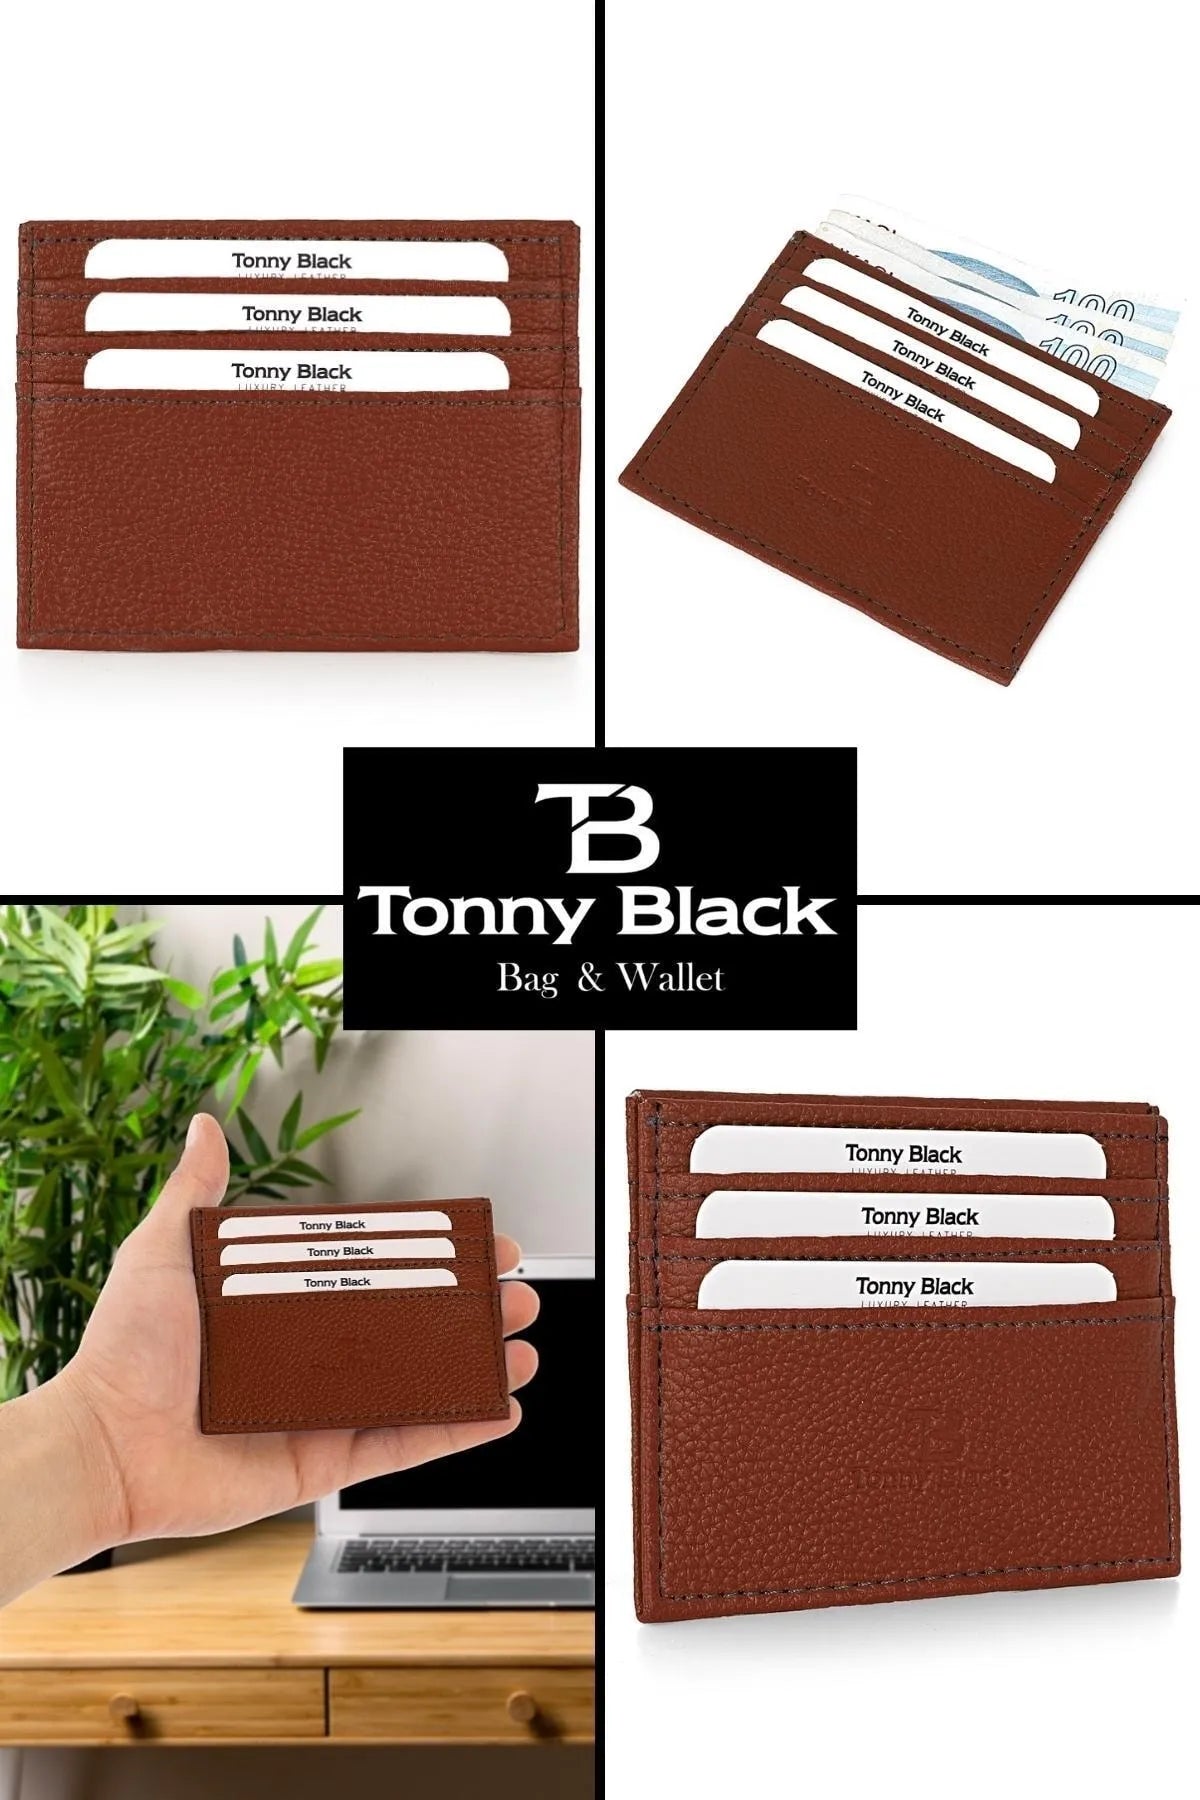 Original Boxed Unisex Super Slim Leather Thin Model Credit Card & Business Card Holder in Brown